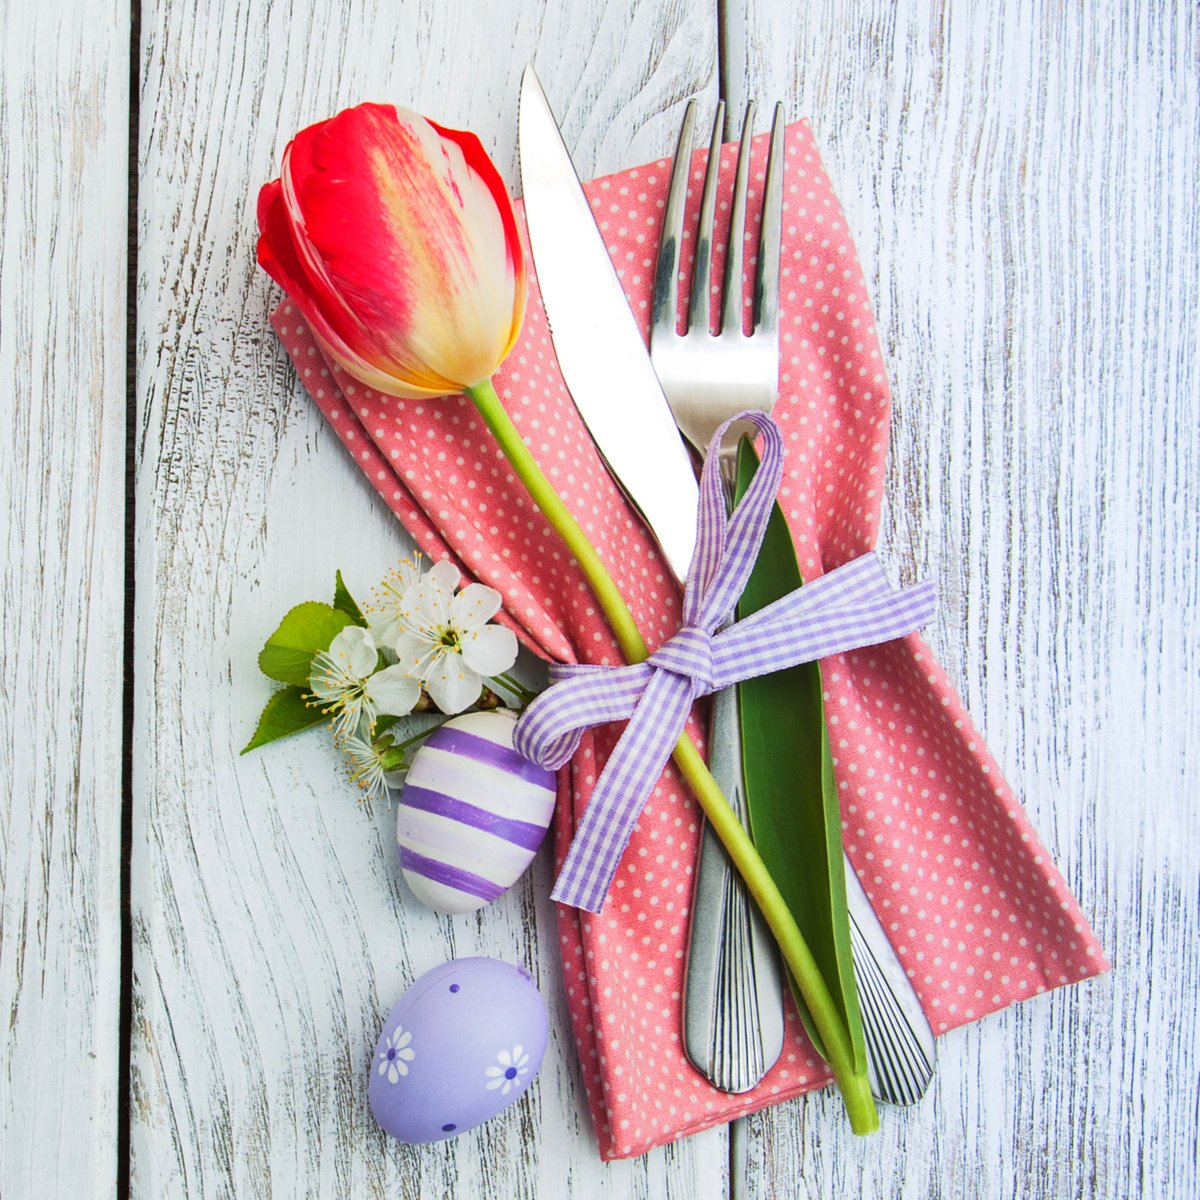 Happy Easter to all our amazing customers and partners! Whether you're serving up a celebration or enjoying an easy-going Sunday, we hope your restaurant's tables are filled with family, friends, and delicious meals 🌷 #TriMarkUSA #RestaurantIndustry